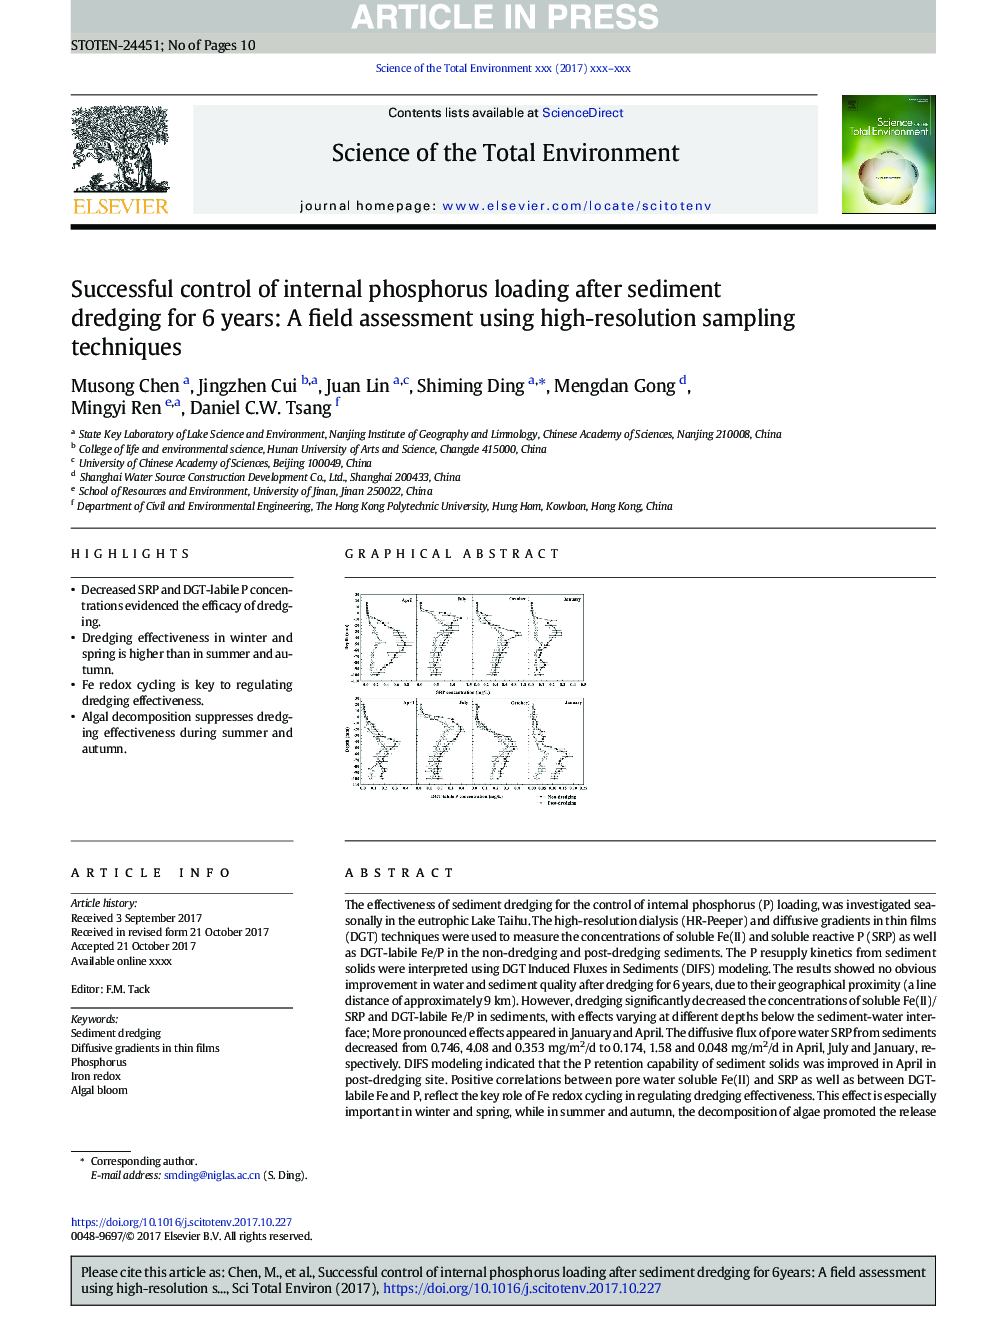 Successful control of internal phosphorus loading after sediment dredging for 6Â years: A field assessment using high-resolution sampling techniques